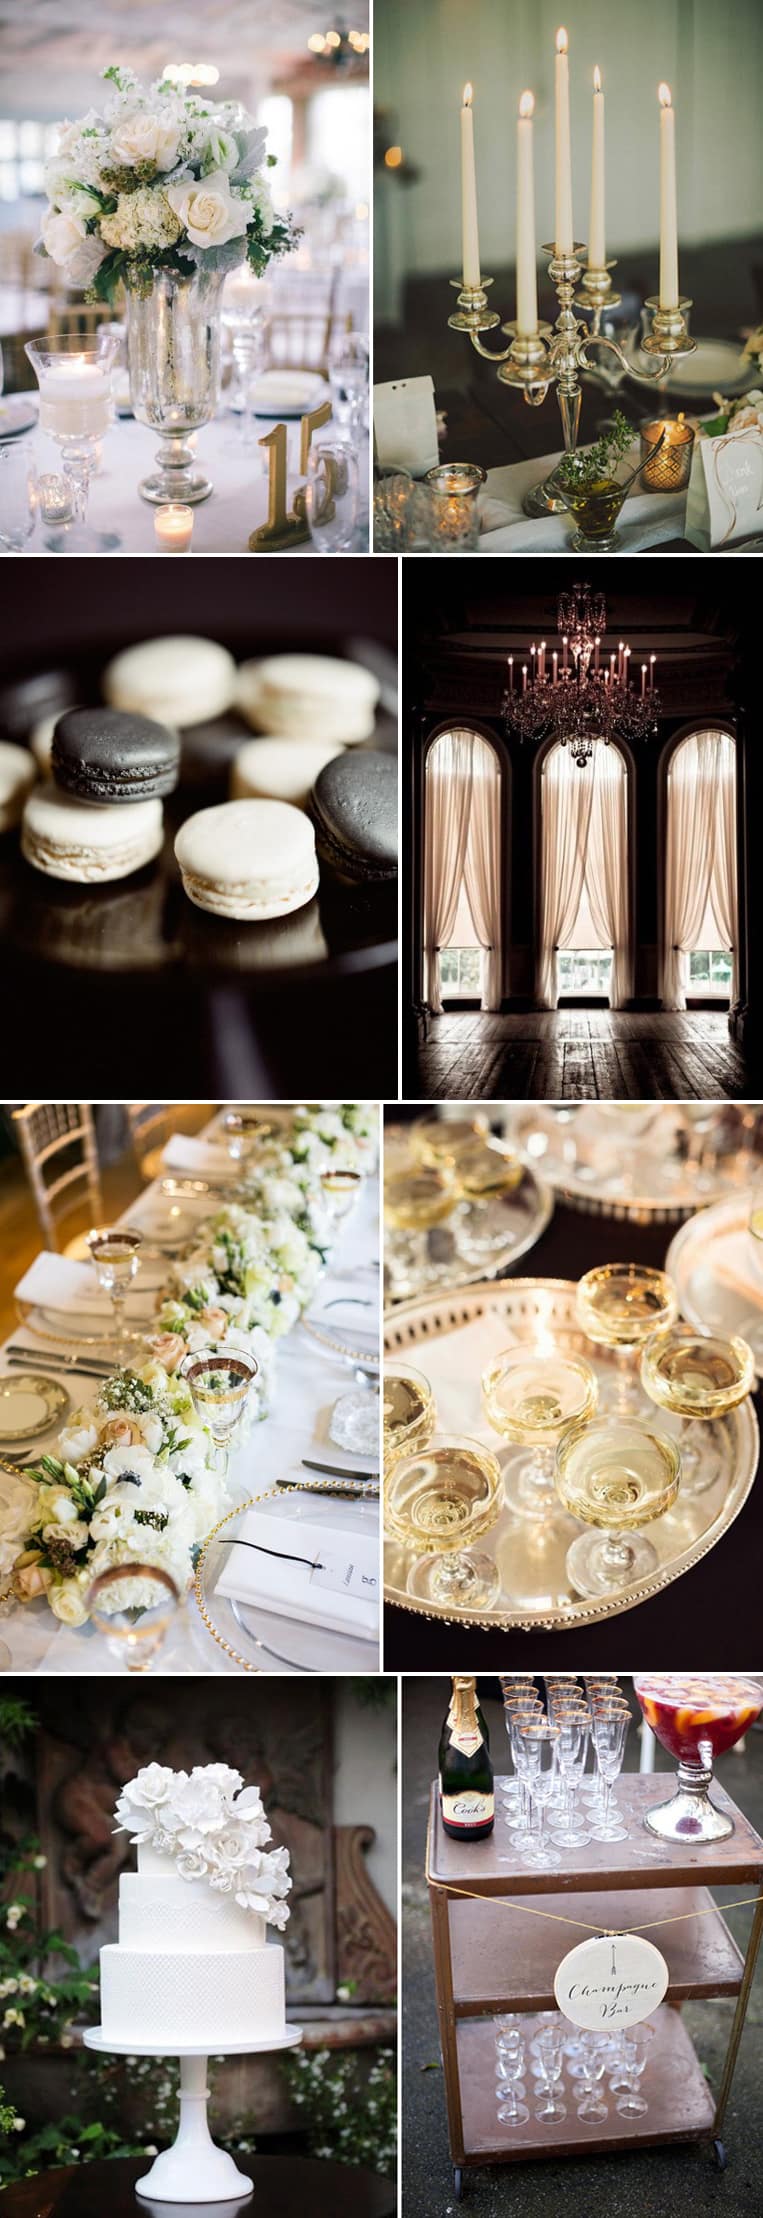 Coco Wedding Venues - Classic Elegance - Wedding Style Category - Dine.